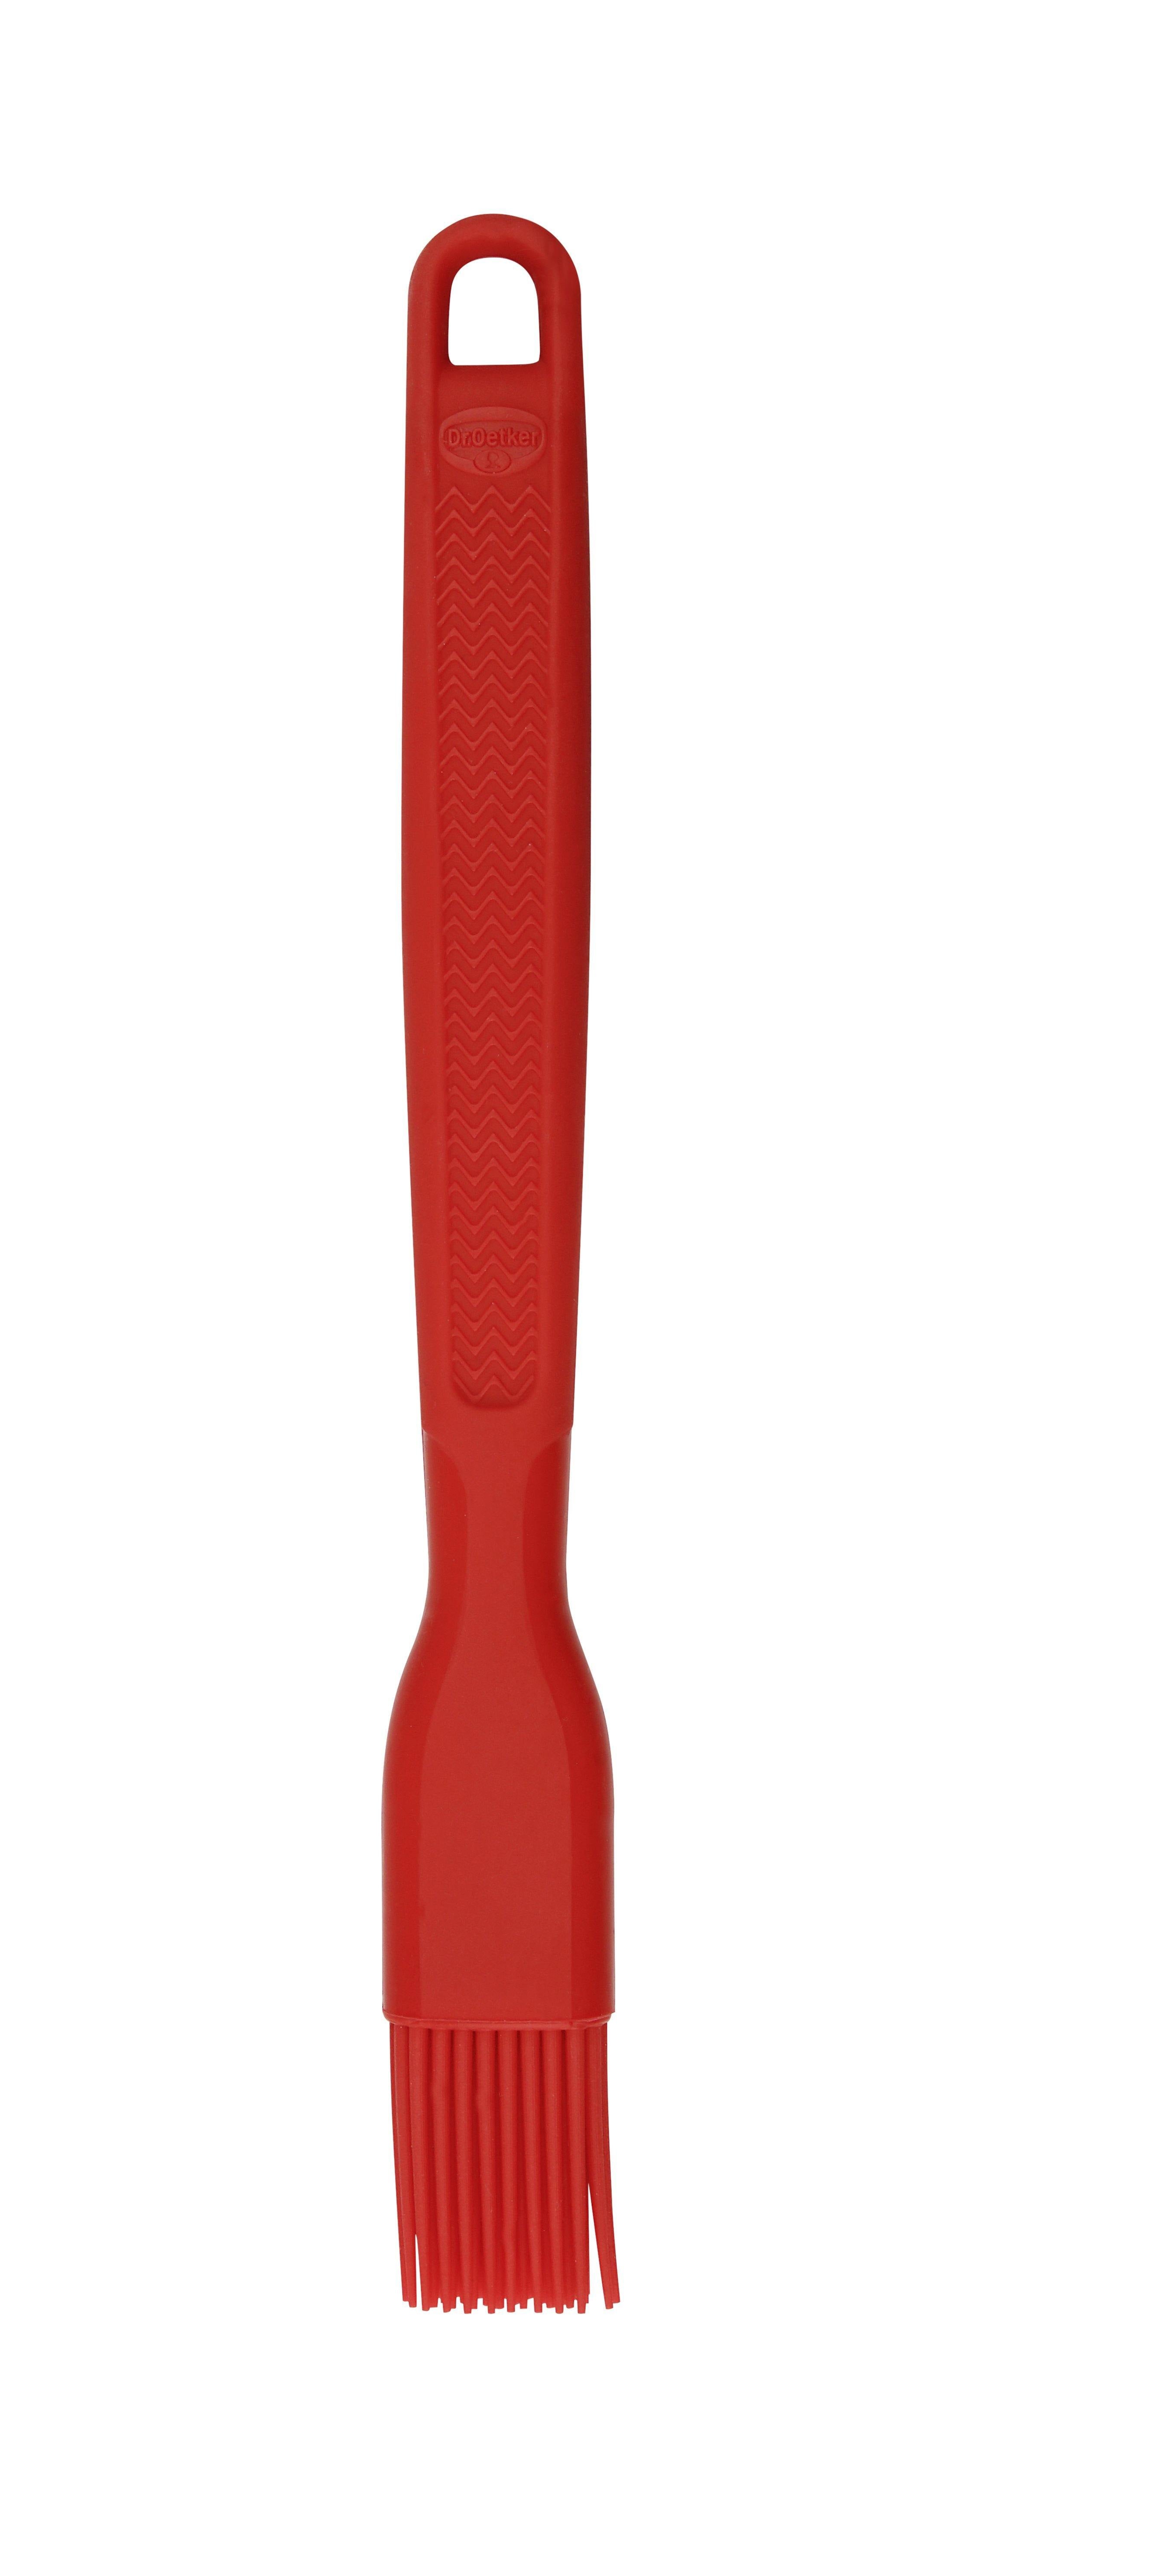 Dr. Oetker "Flexxibel Love" Silicone Pastry Brush Small, Red, 25X220 Mm - Whole and All